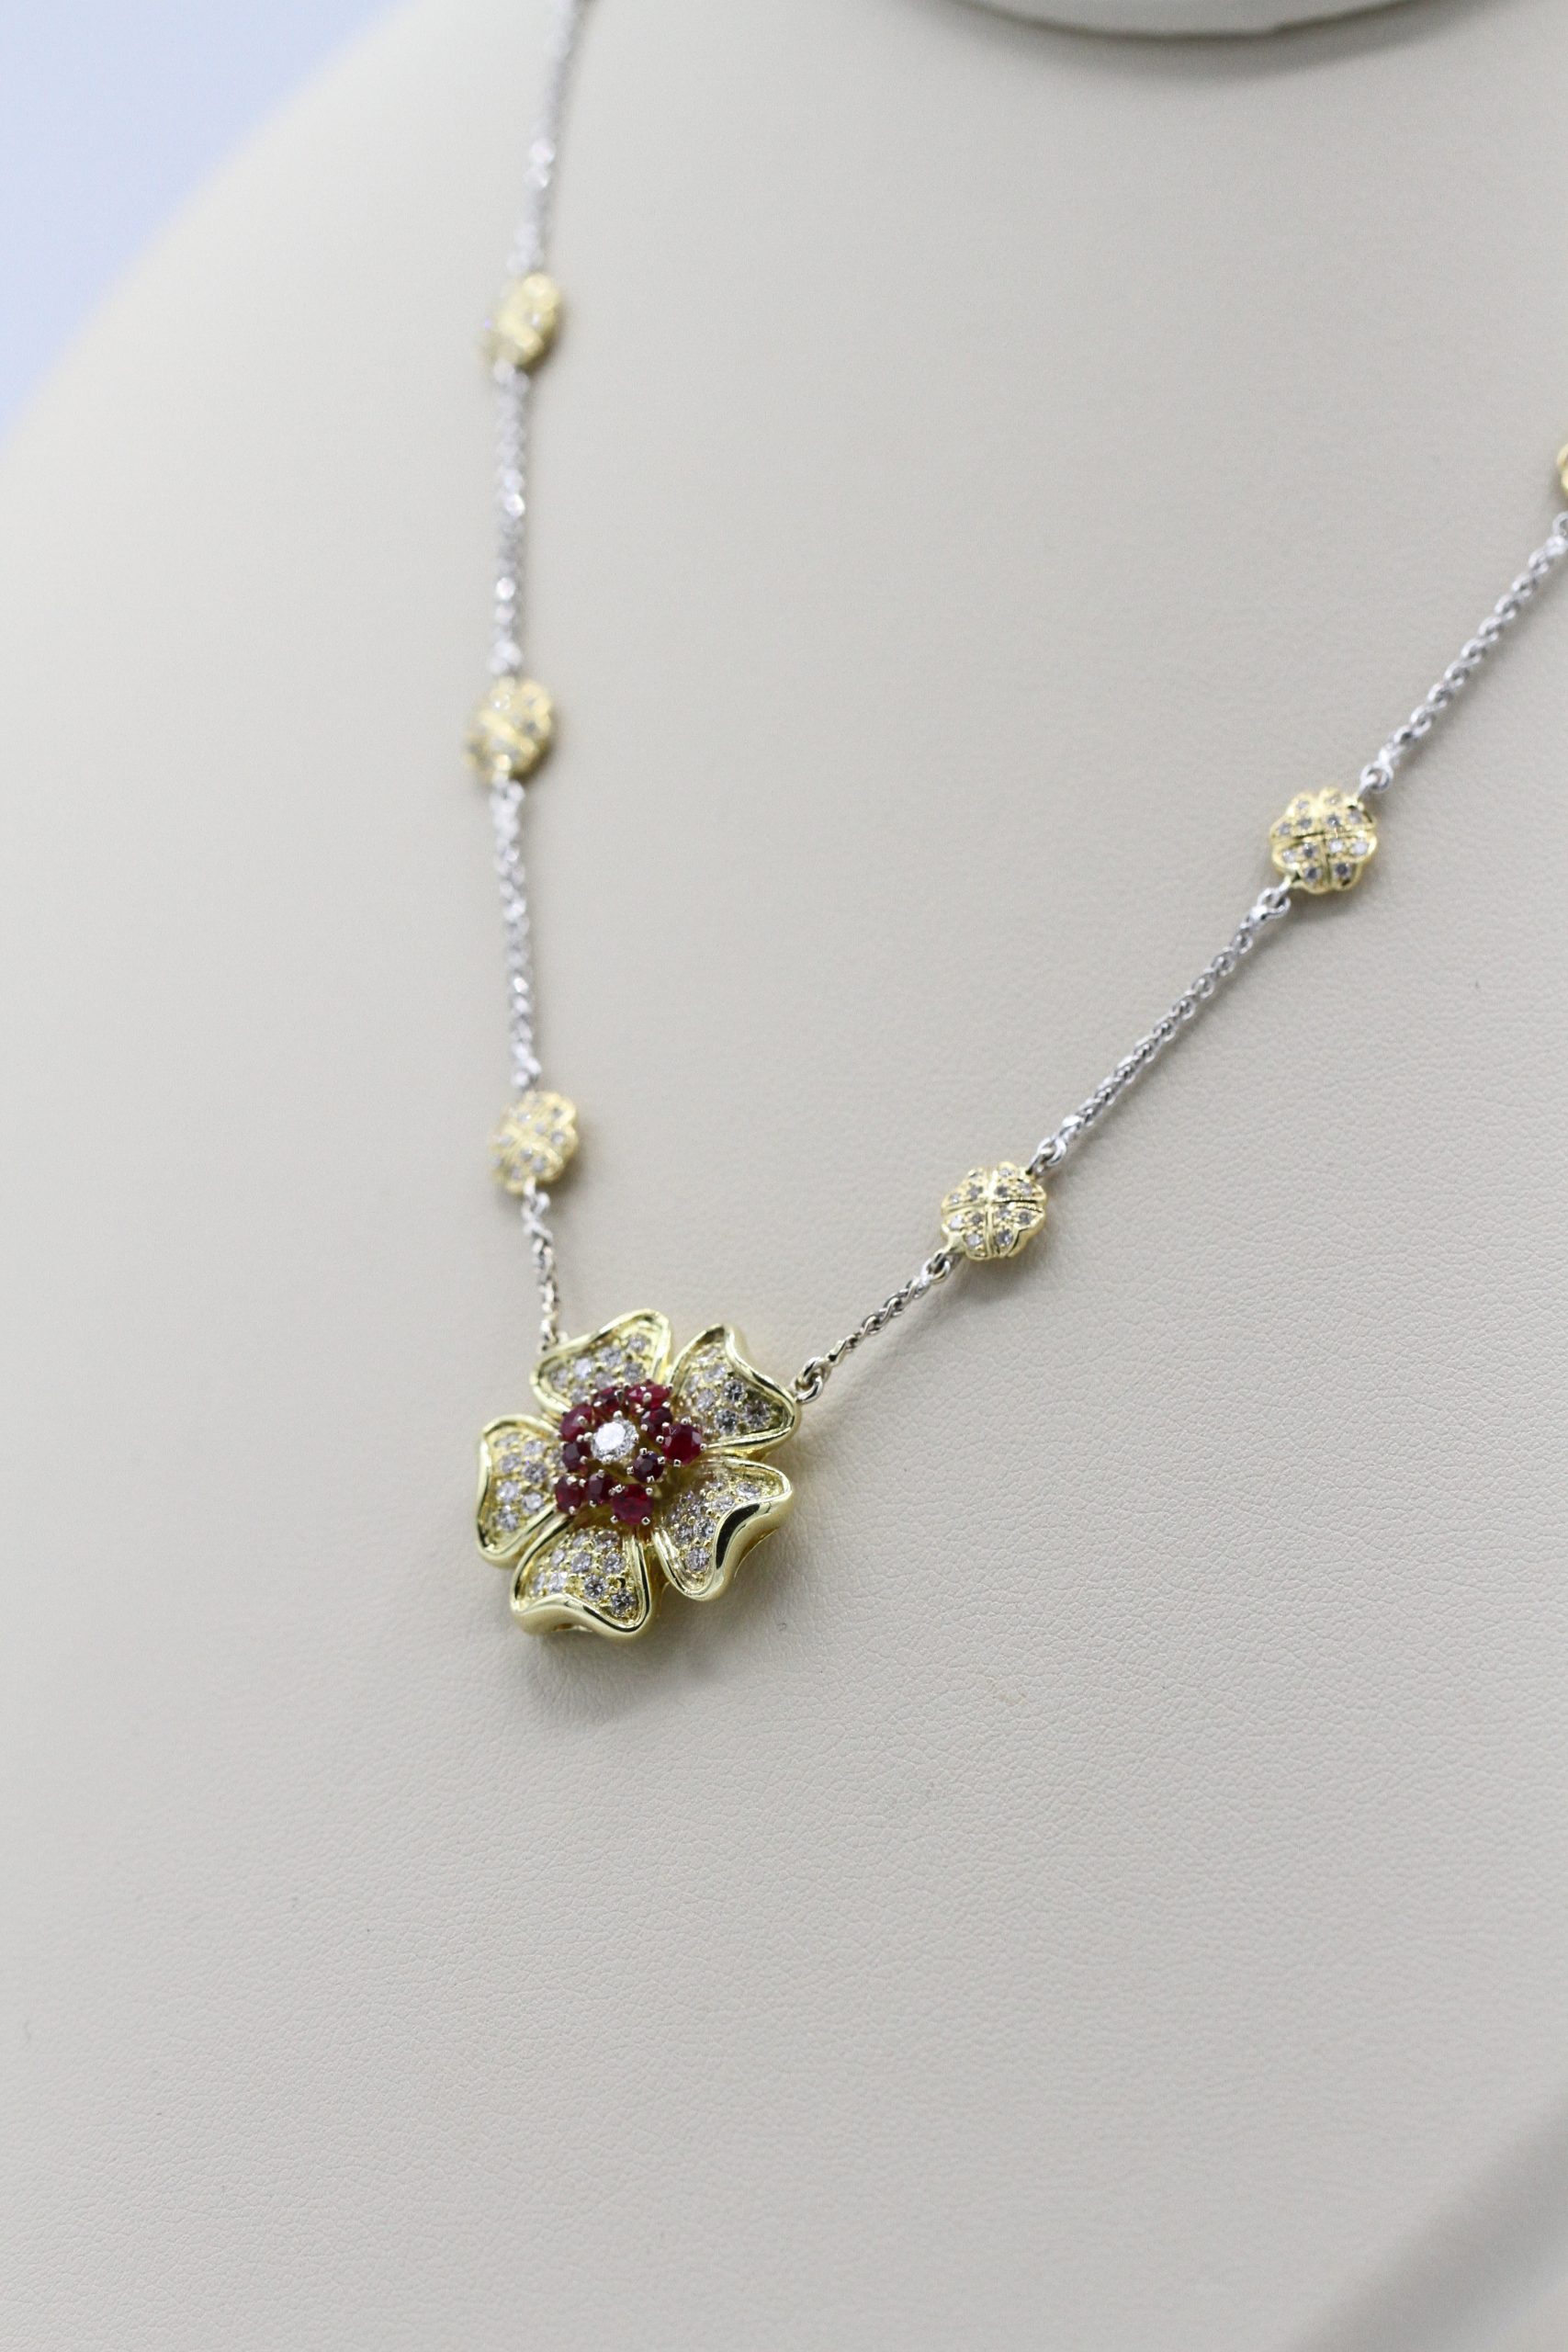 A necklace in the shape of a clover with red stones